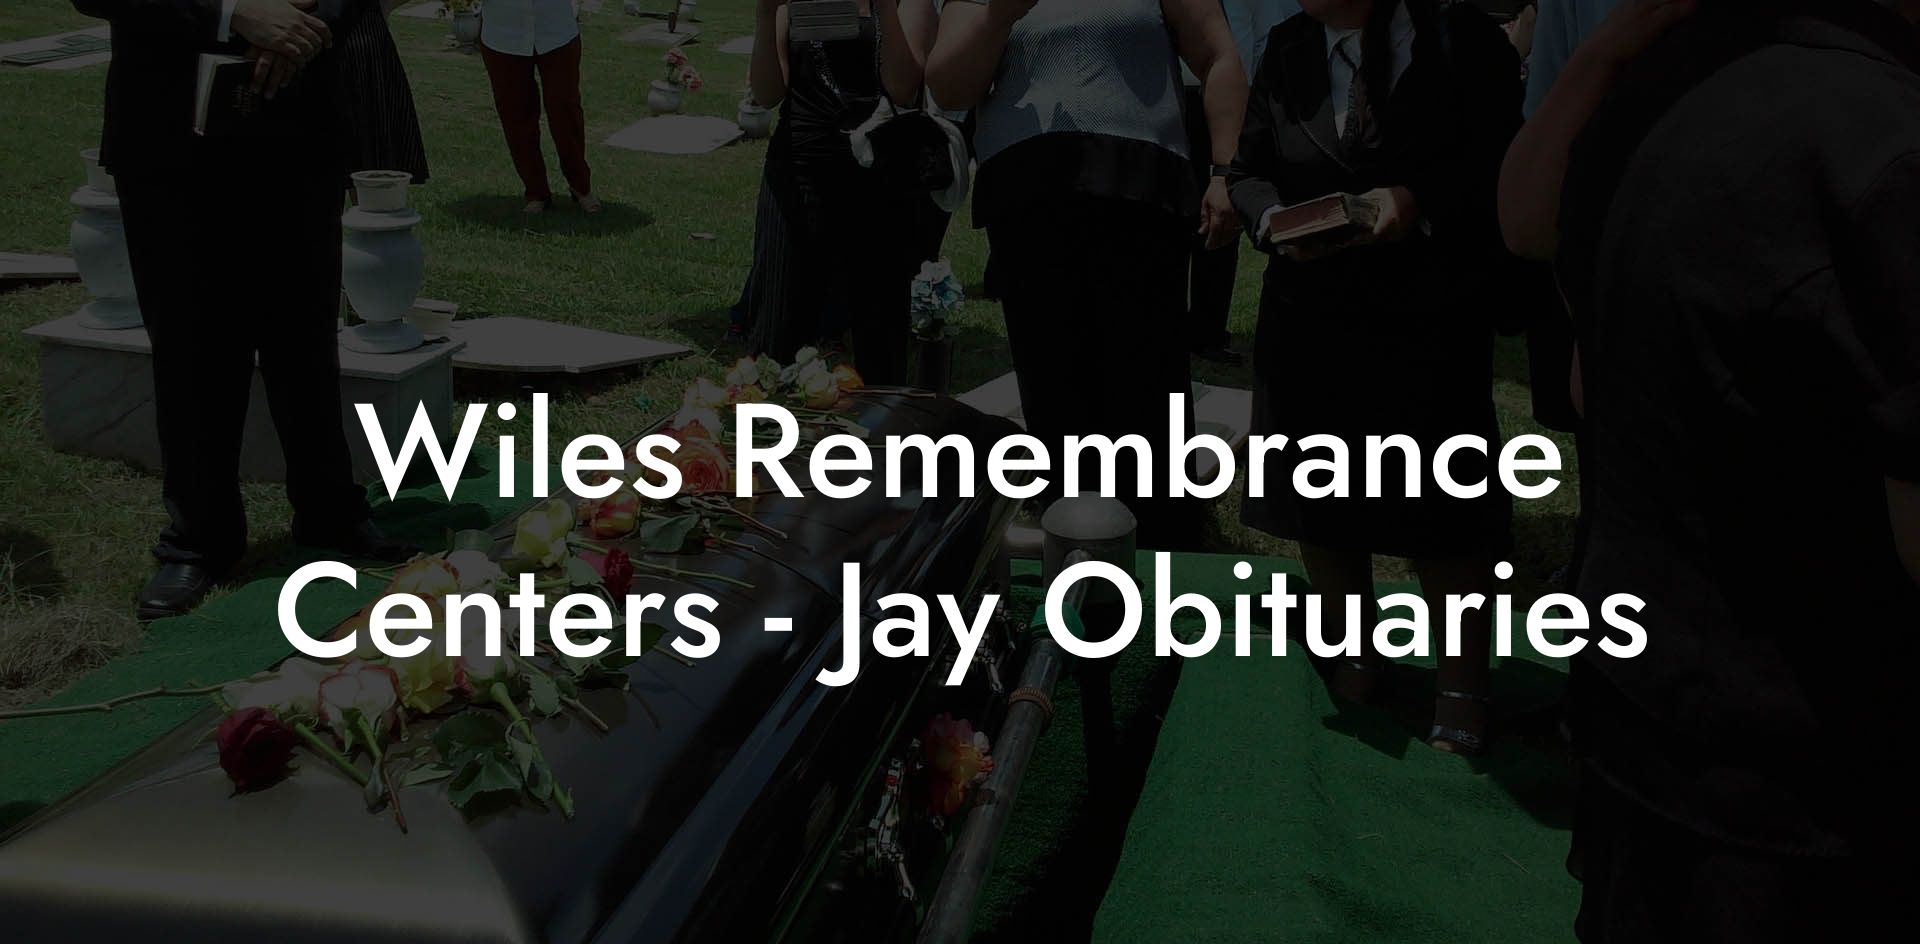 Wiles Remembrance Centers - Jay Obituaries